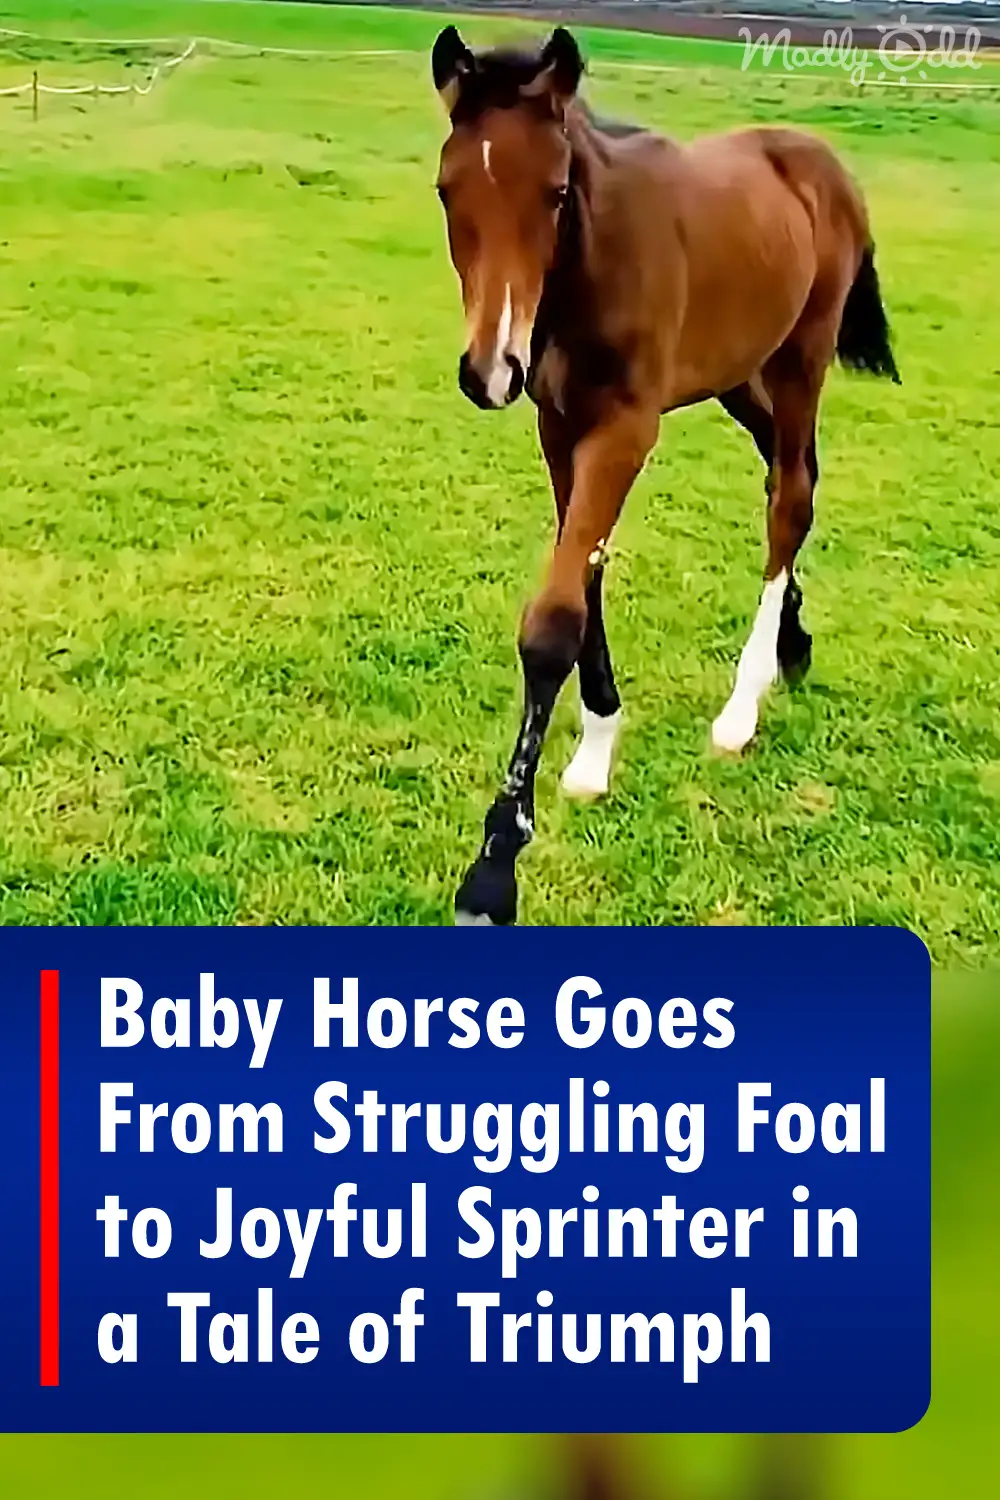 Baby Horse Goes From Struggling Foal to Joyful Sprinter in a Tale of Triumph